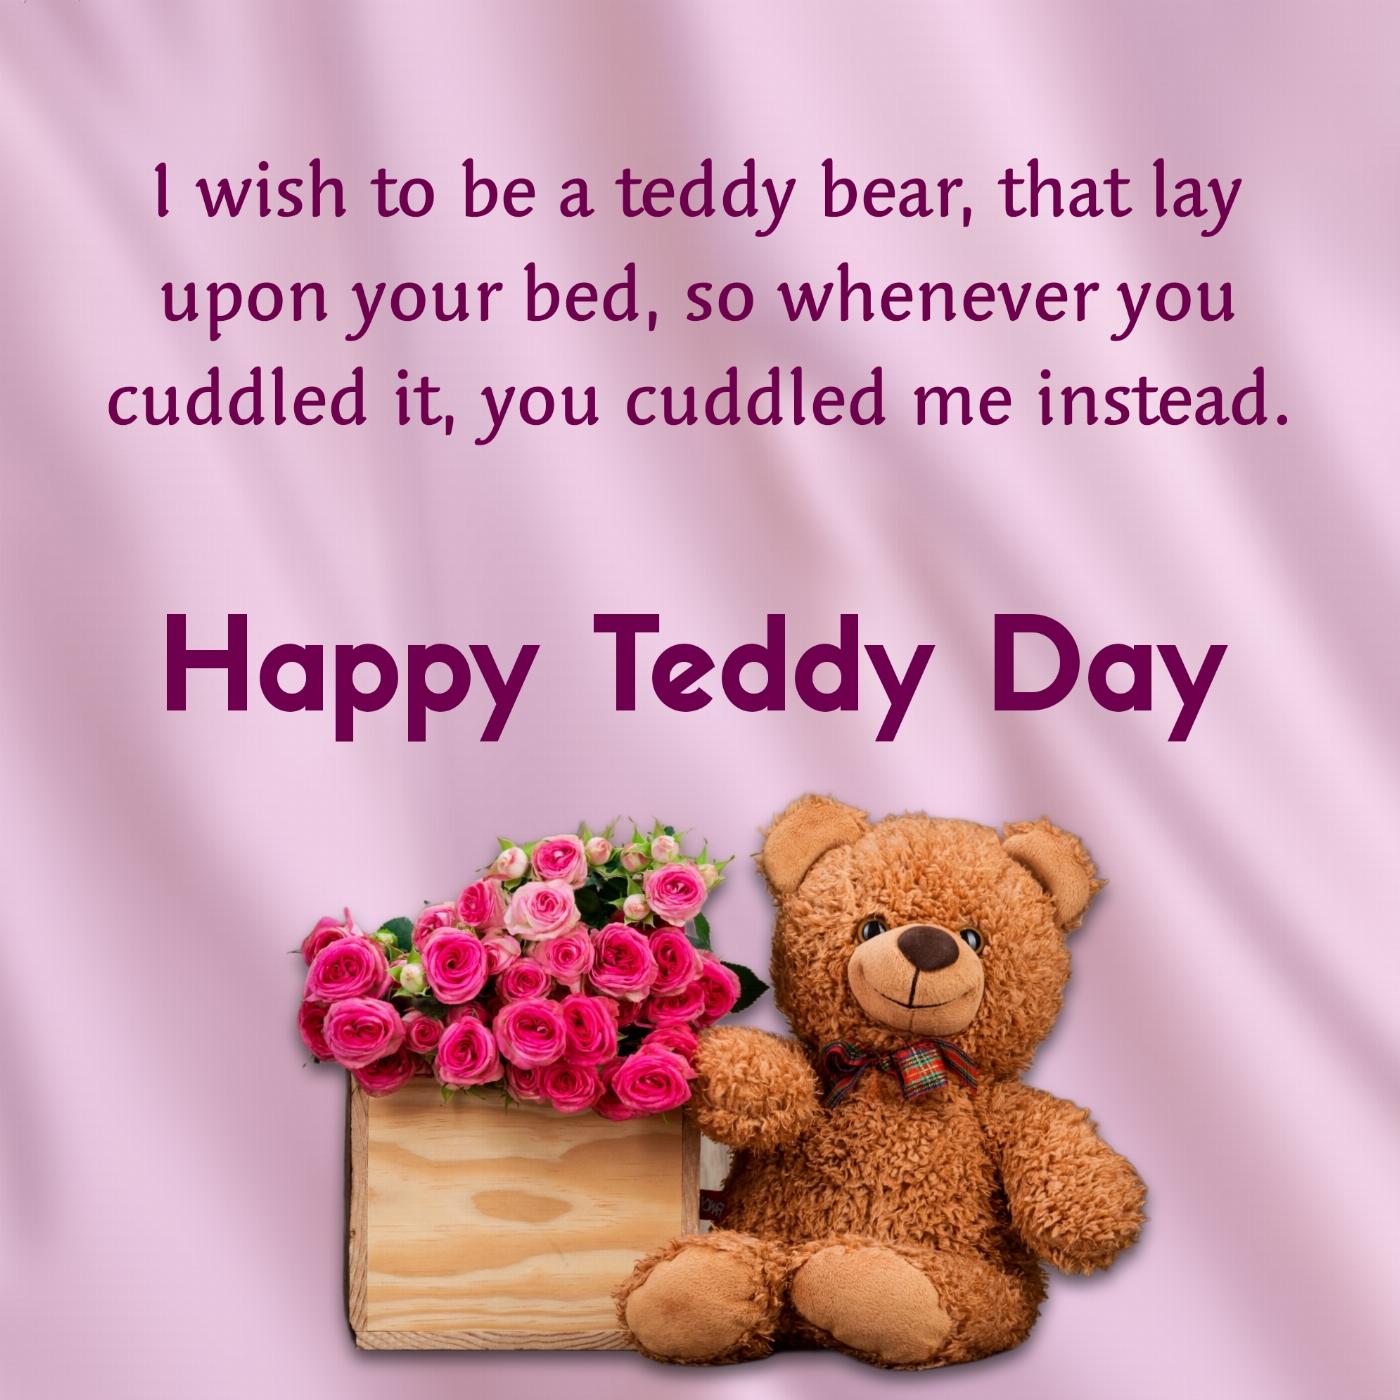 I wish to be a teddy bear that lay upon your bed